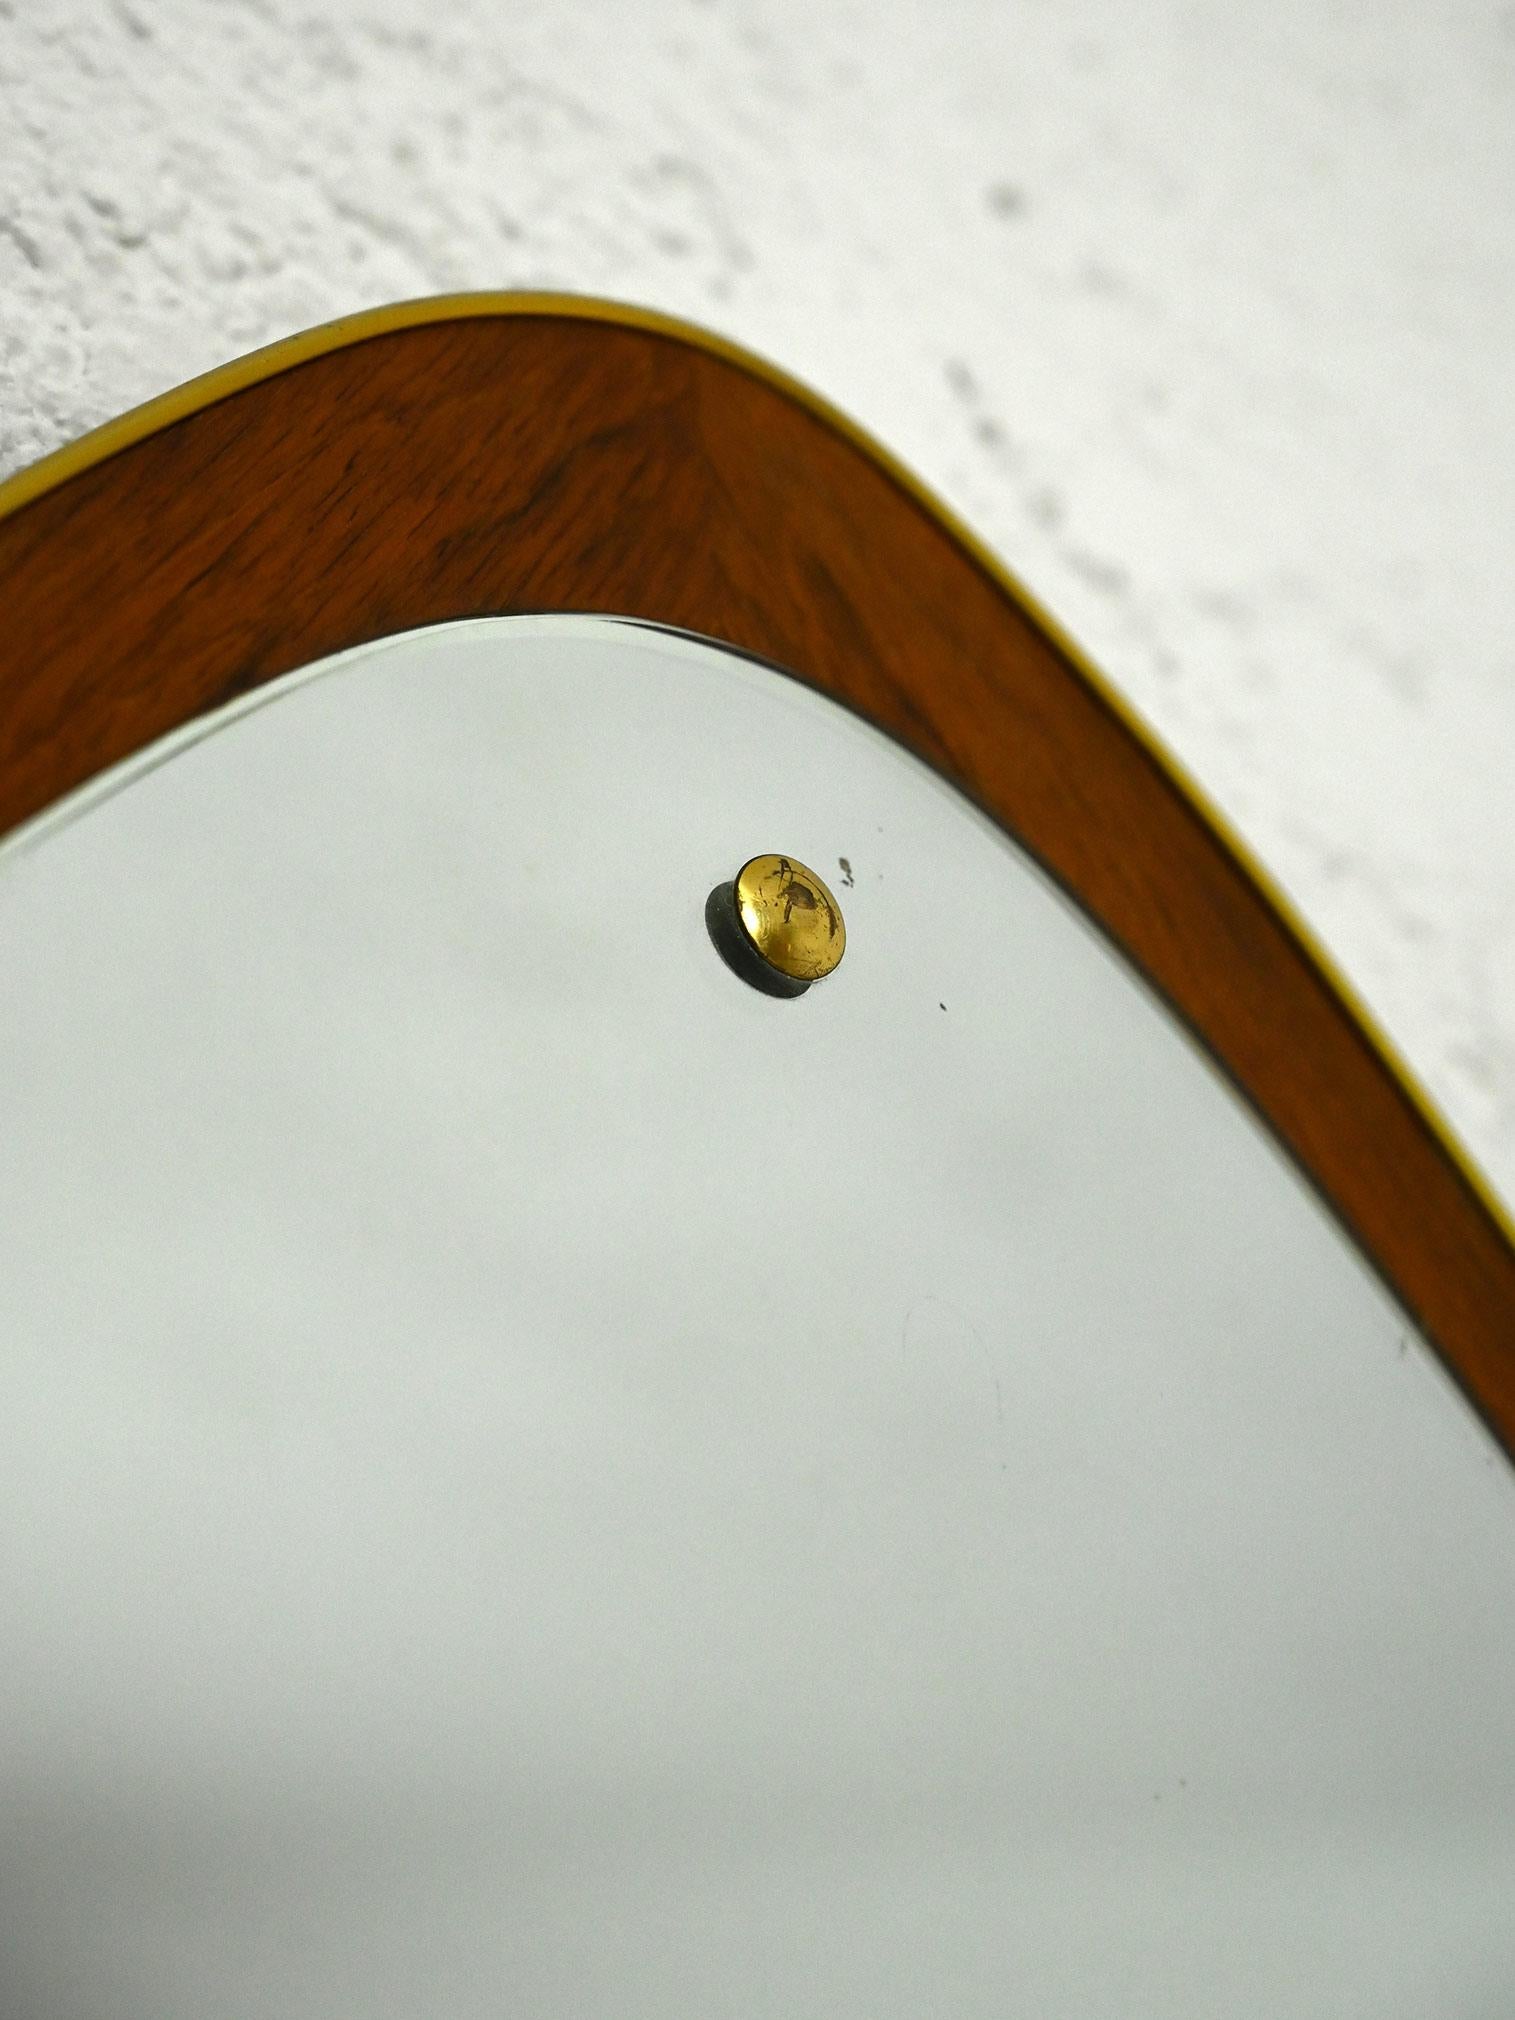 Vintage mirror of triangular shape with slightly rounded corners manufactured in Sweden in the 1950s.

The thin teak wood frame and the use of screw covers highlight its authenticity and unique character. 
Despite its small size, it adds a